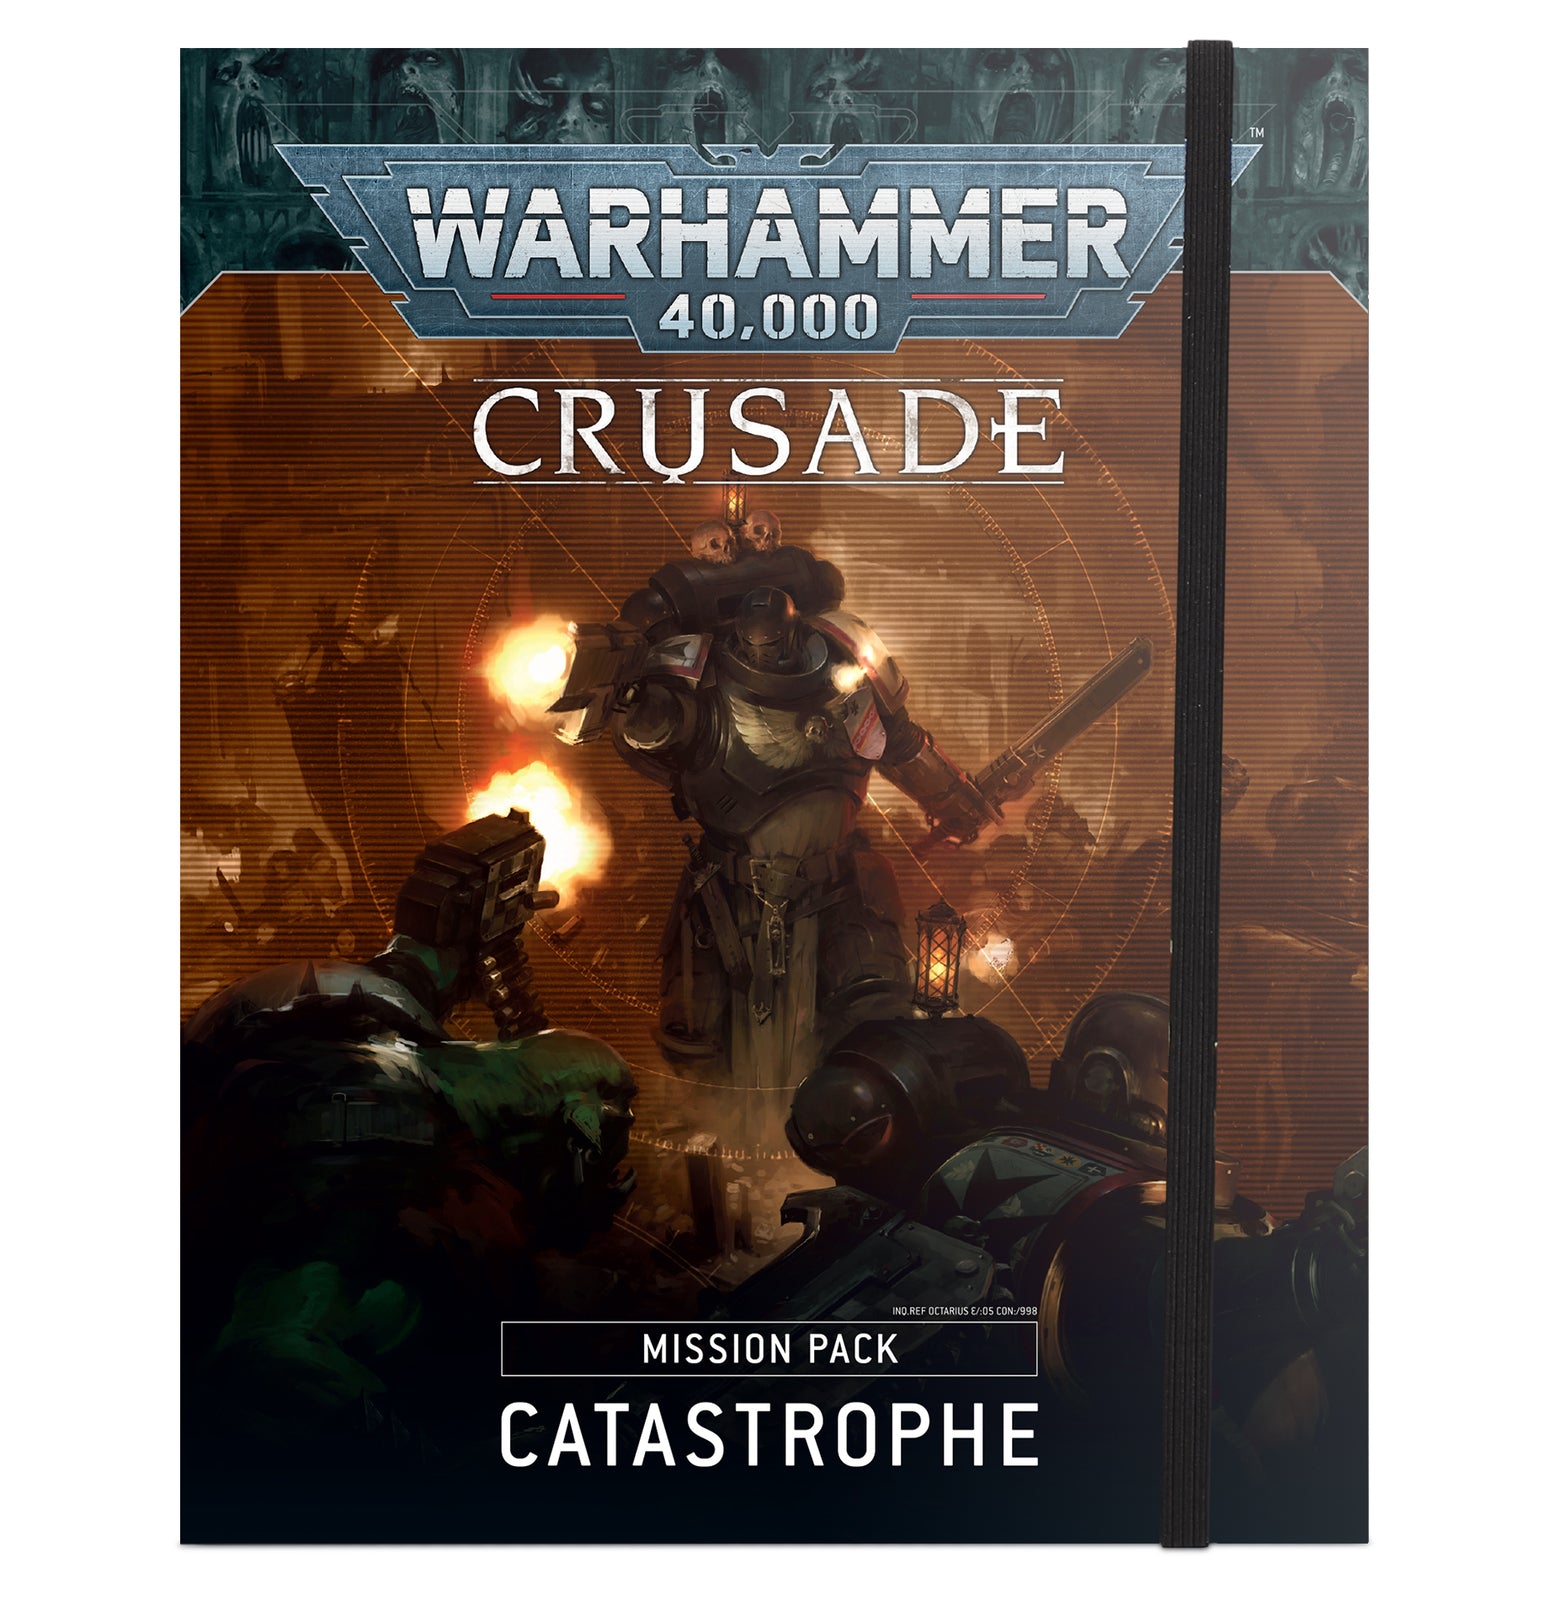 Catastrophe Mission Pack - Warhammer 40,000 Crusade